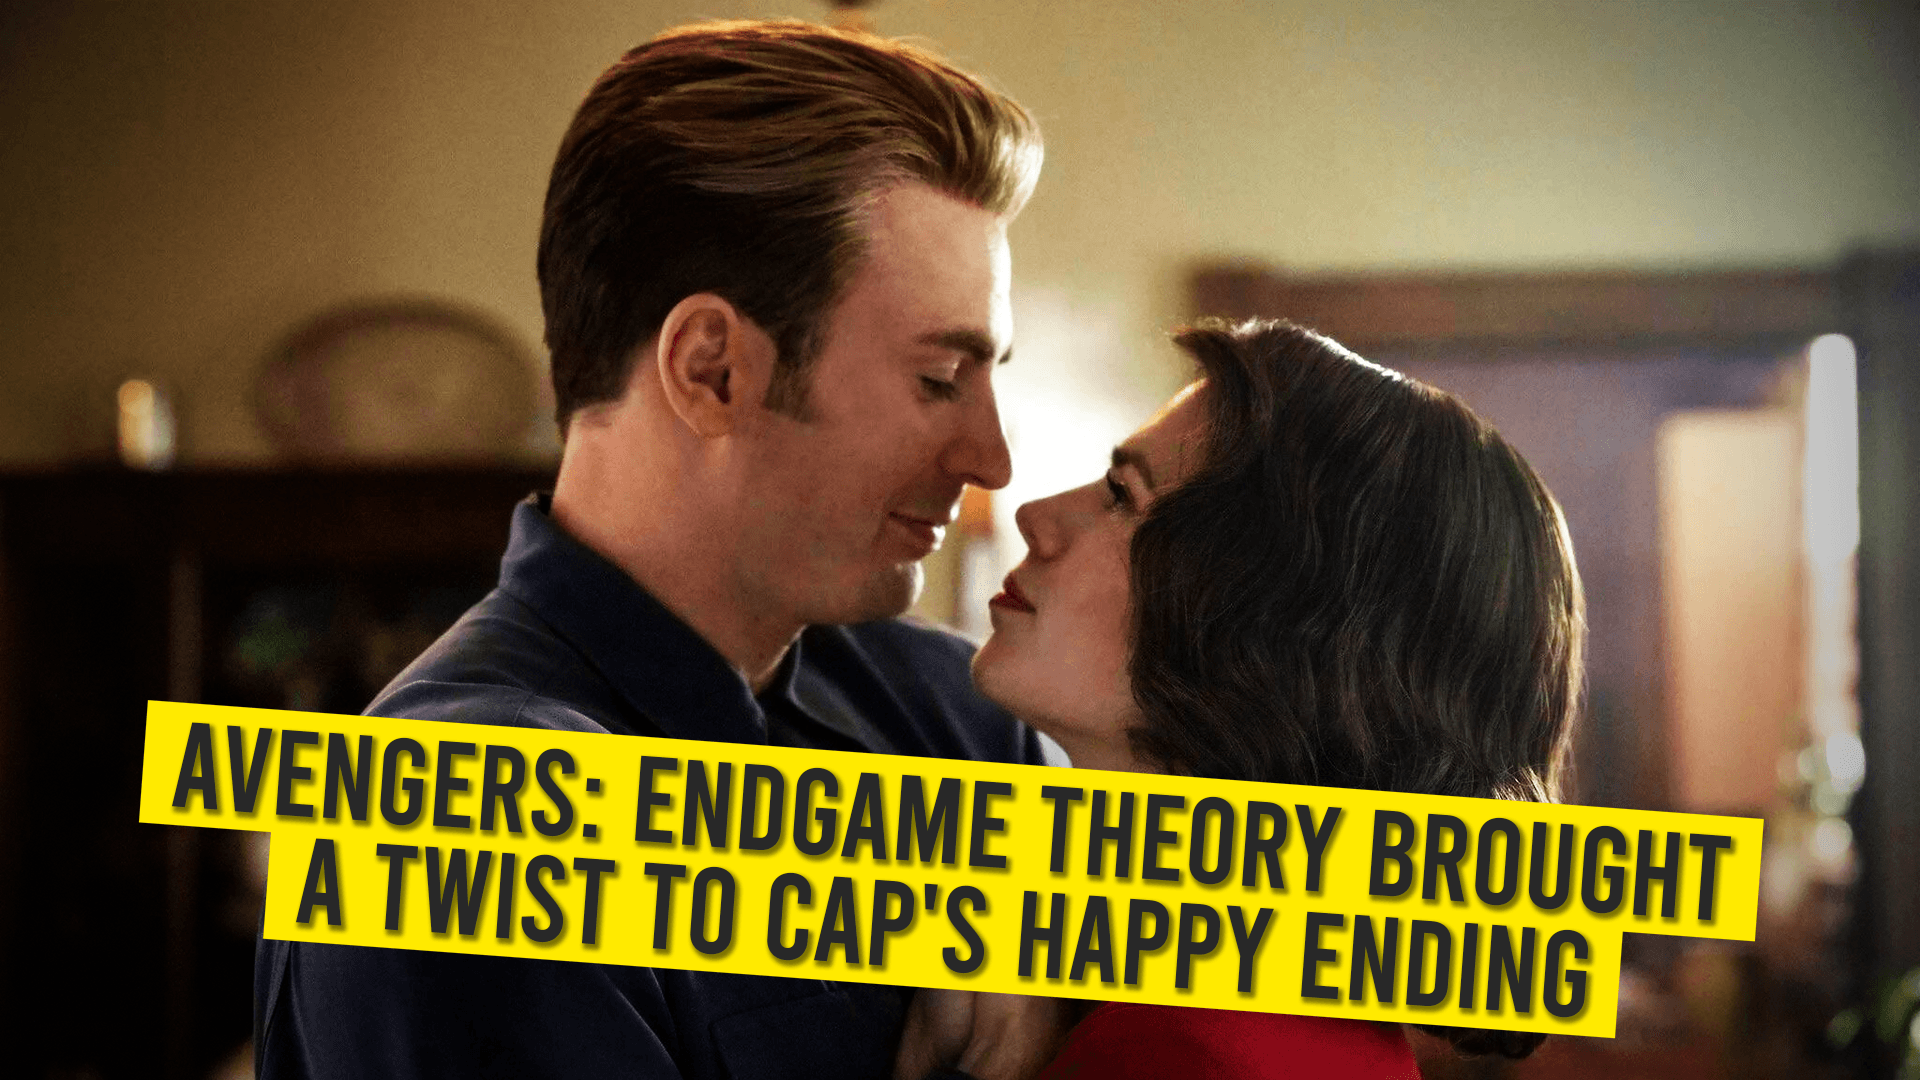 Avengers: Endgame Theory Brought a TWIST to Cap’s Happy Ending